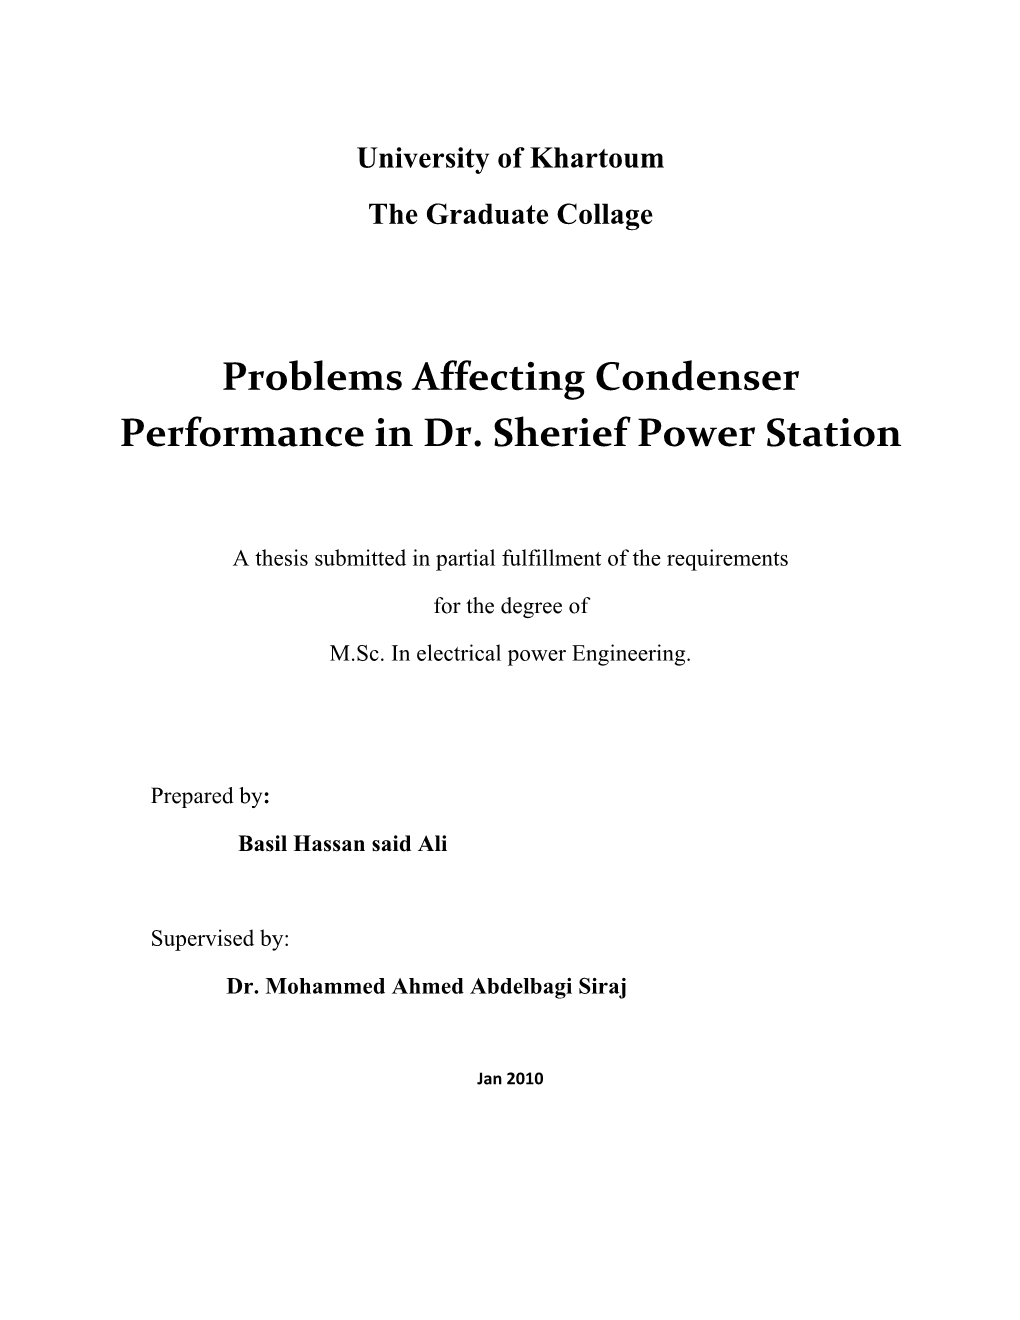 Problems Affecting Condenser Performance in Dr. Sherief Power Station